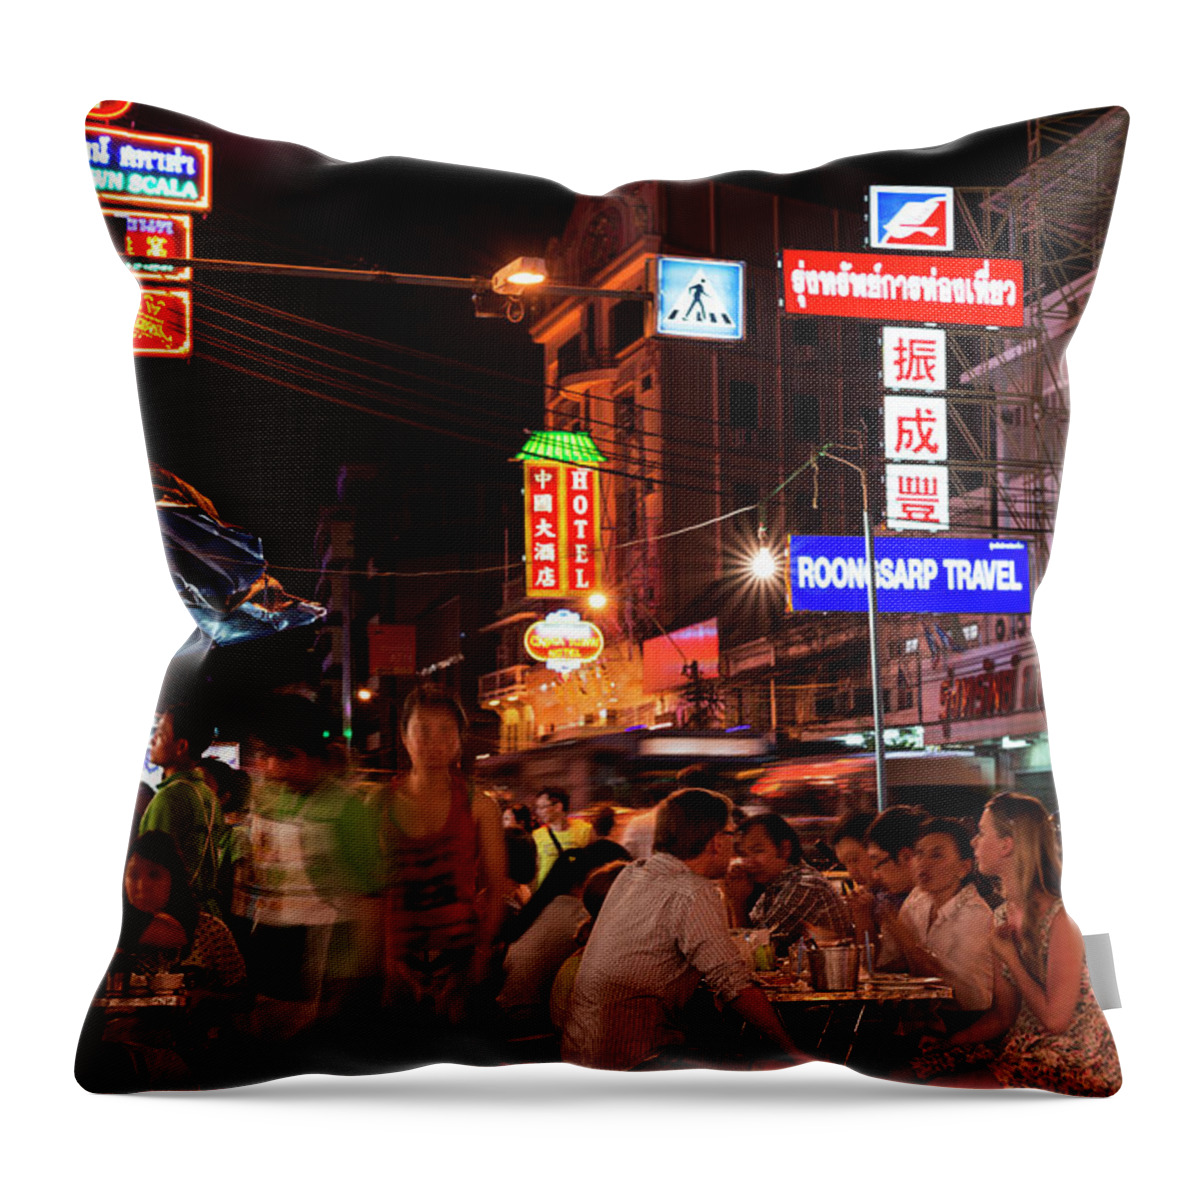 Three Quarter Length Throw Pillow featuring the photograph Bustling Street In Chinatown At Night by Gary Yeowell